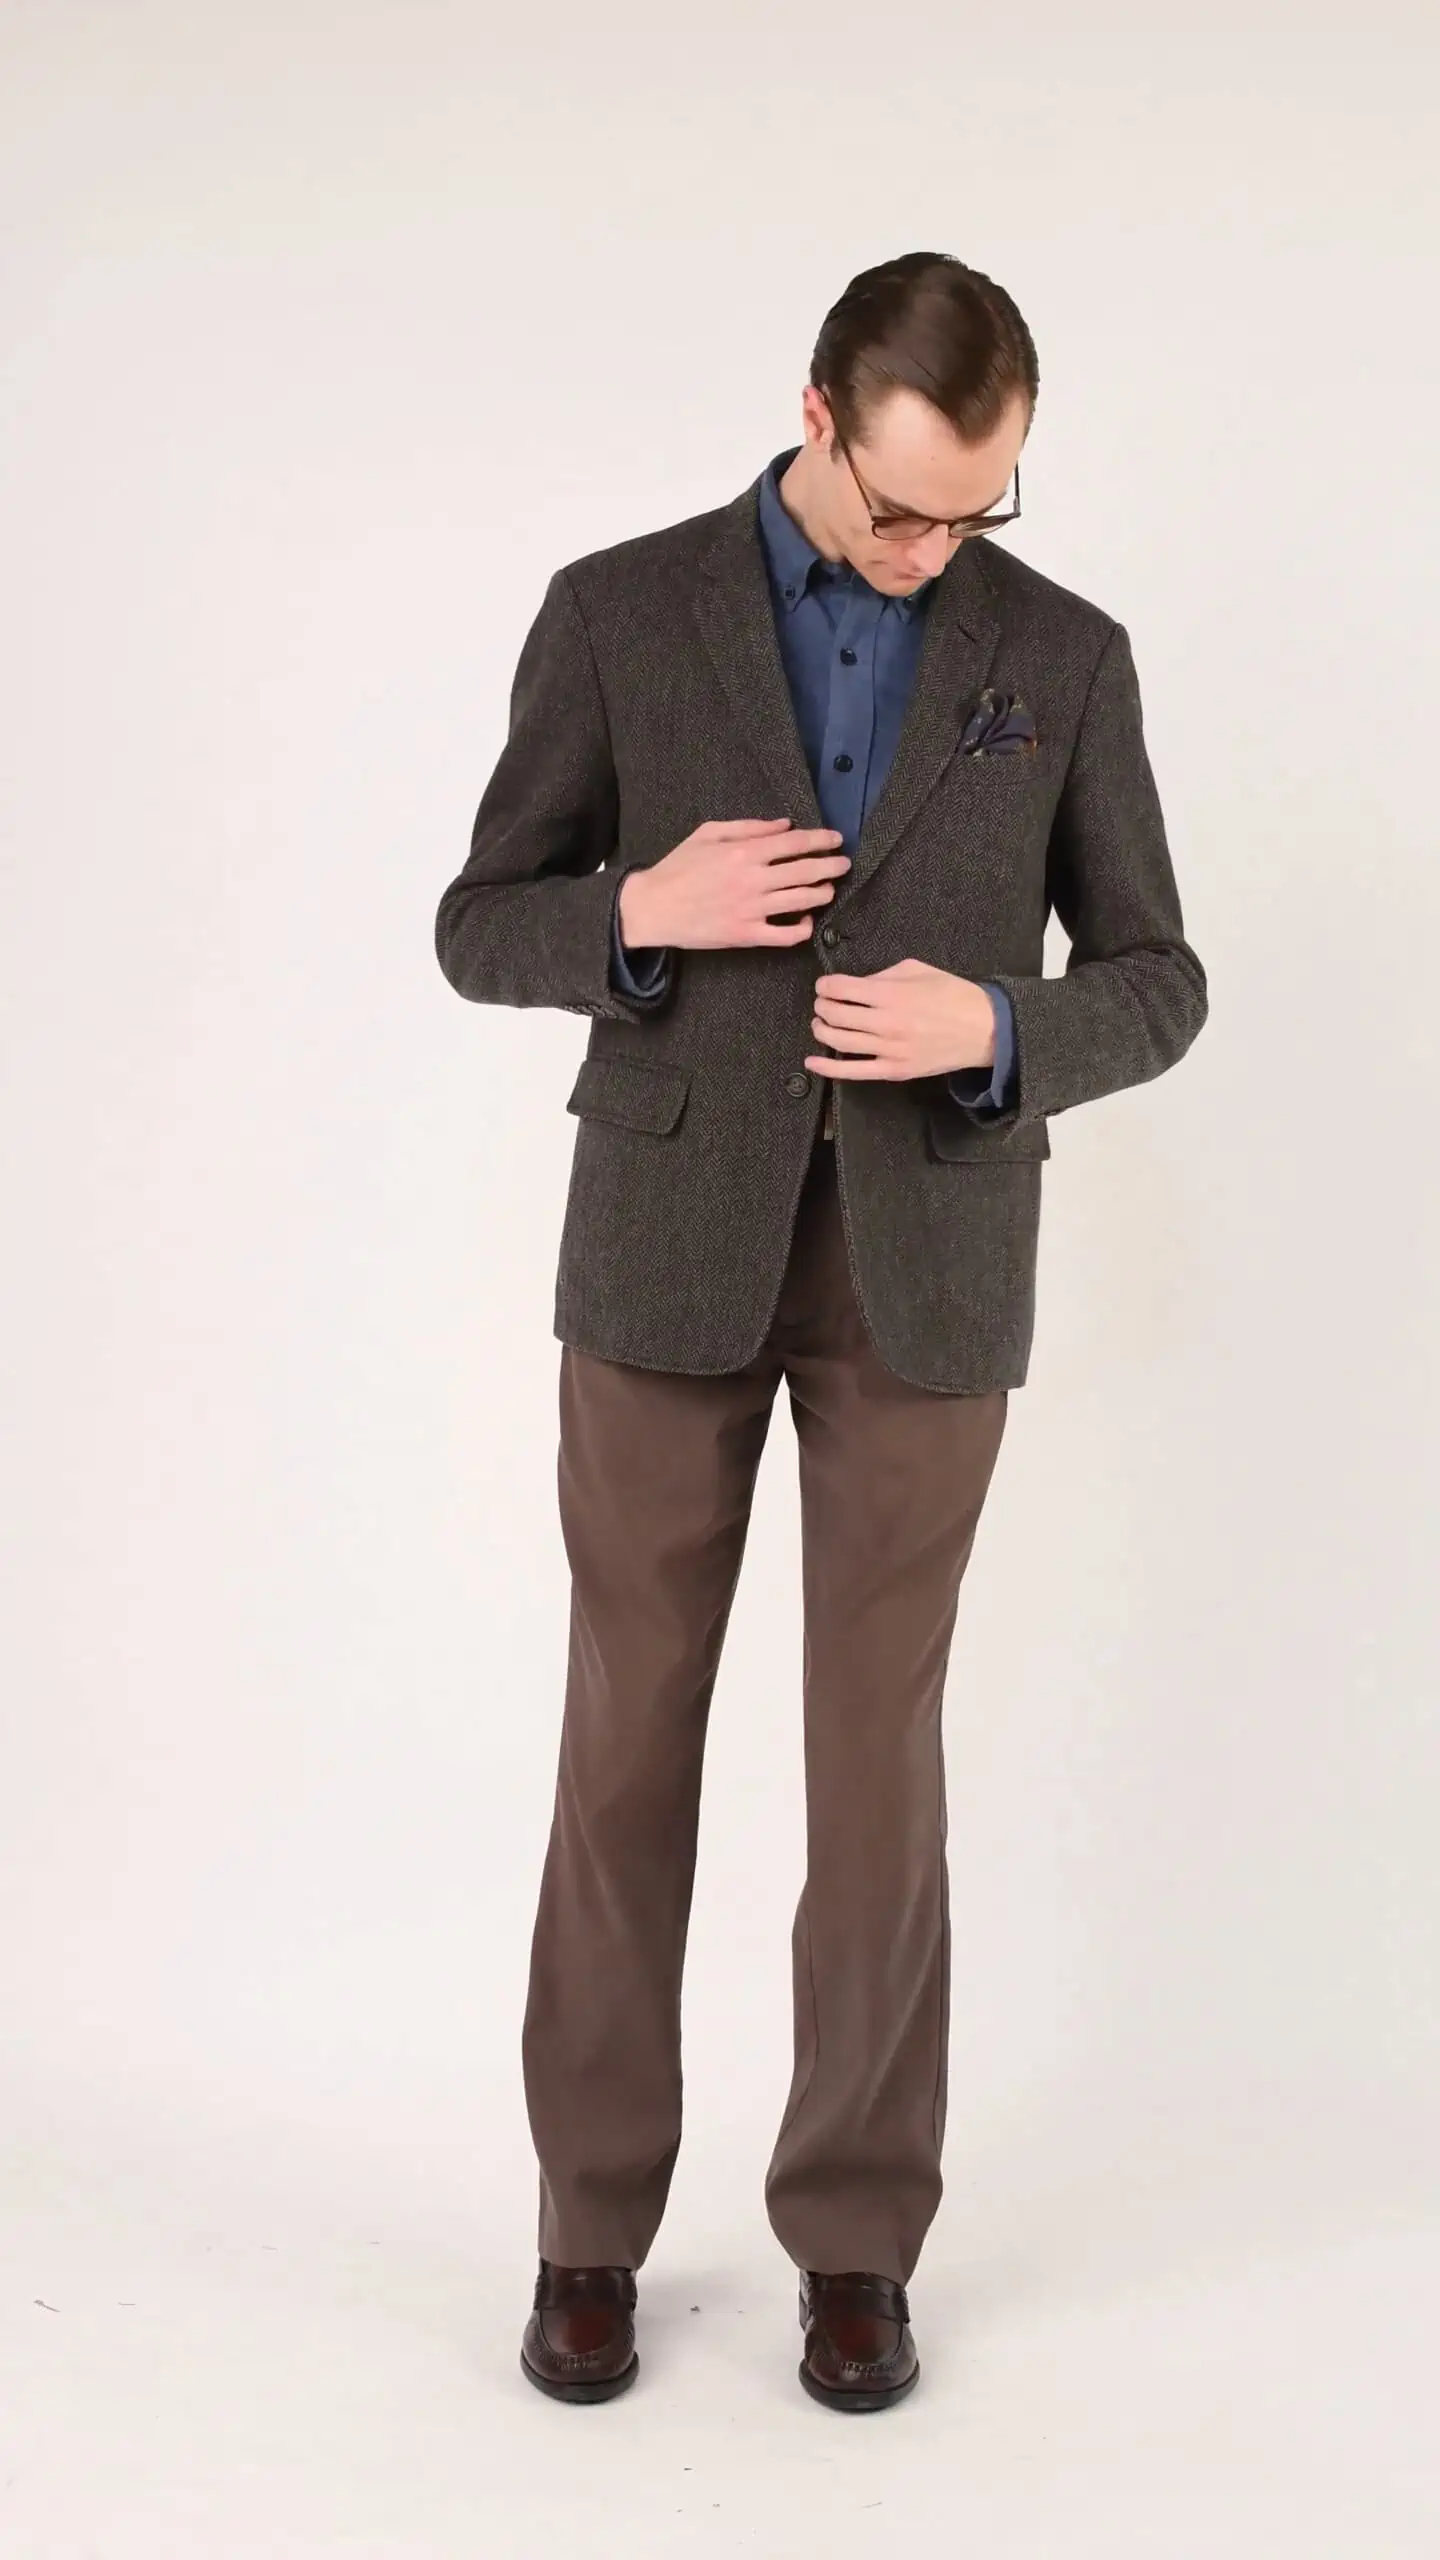 You can elevate the formality of your flannel shirt by adding a sports jacket or blazer